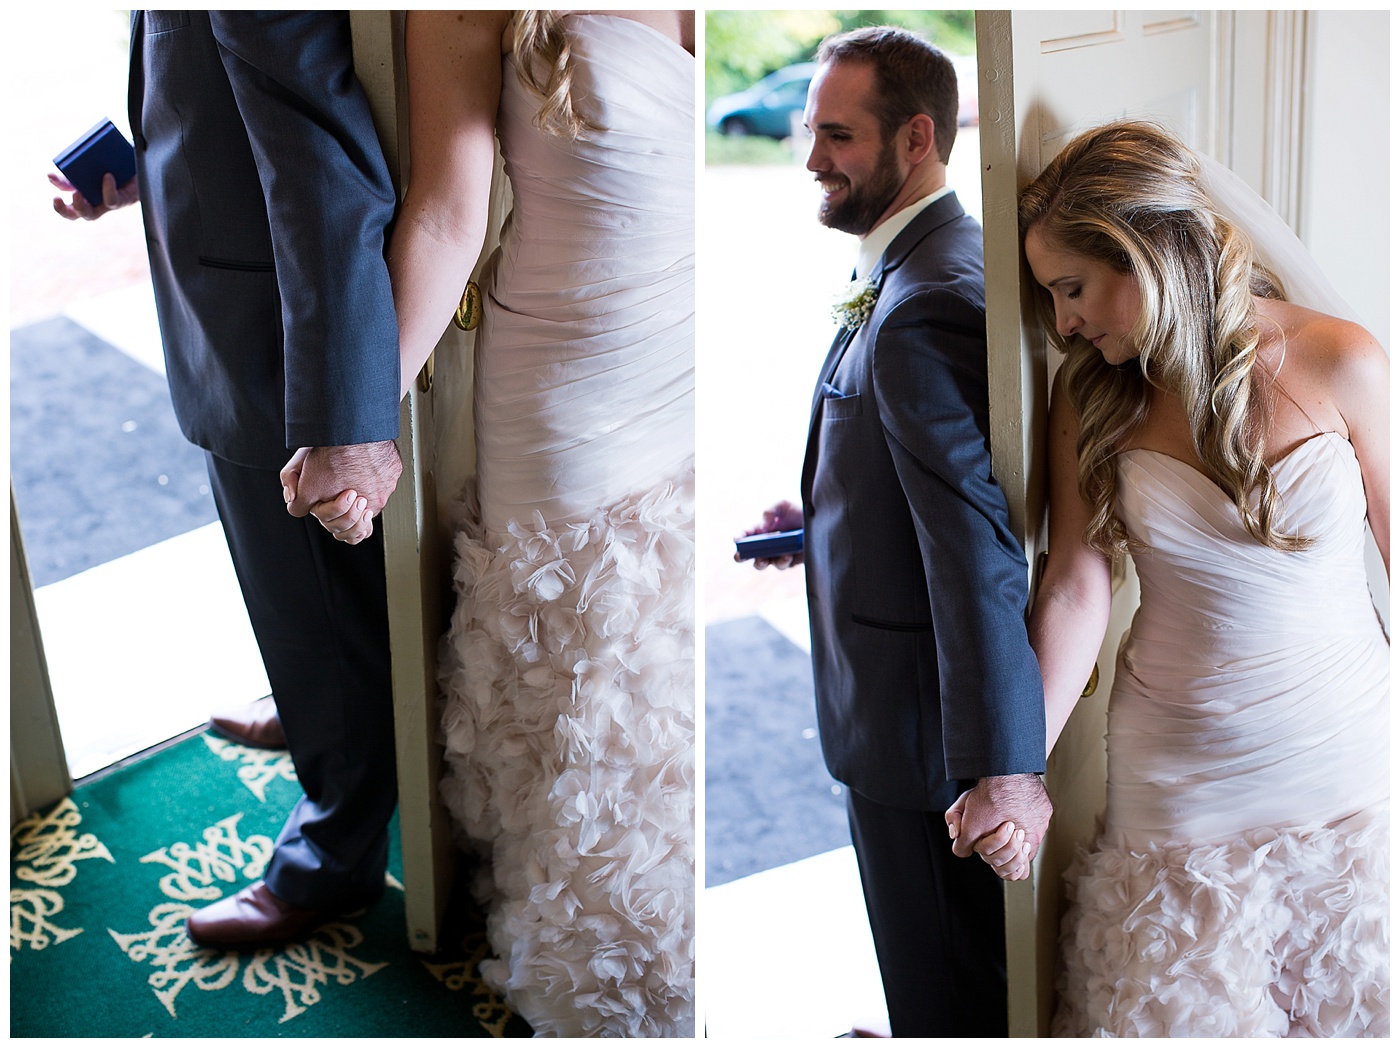 Erin and DJ are Married!!  A sneak peek from their William and Mary Alumni House Wedding in Williamsburg Virginia!